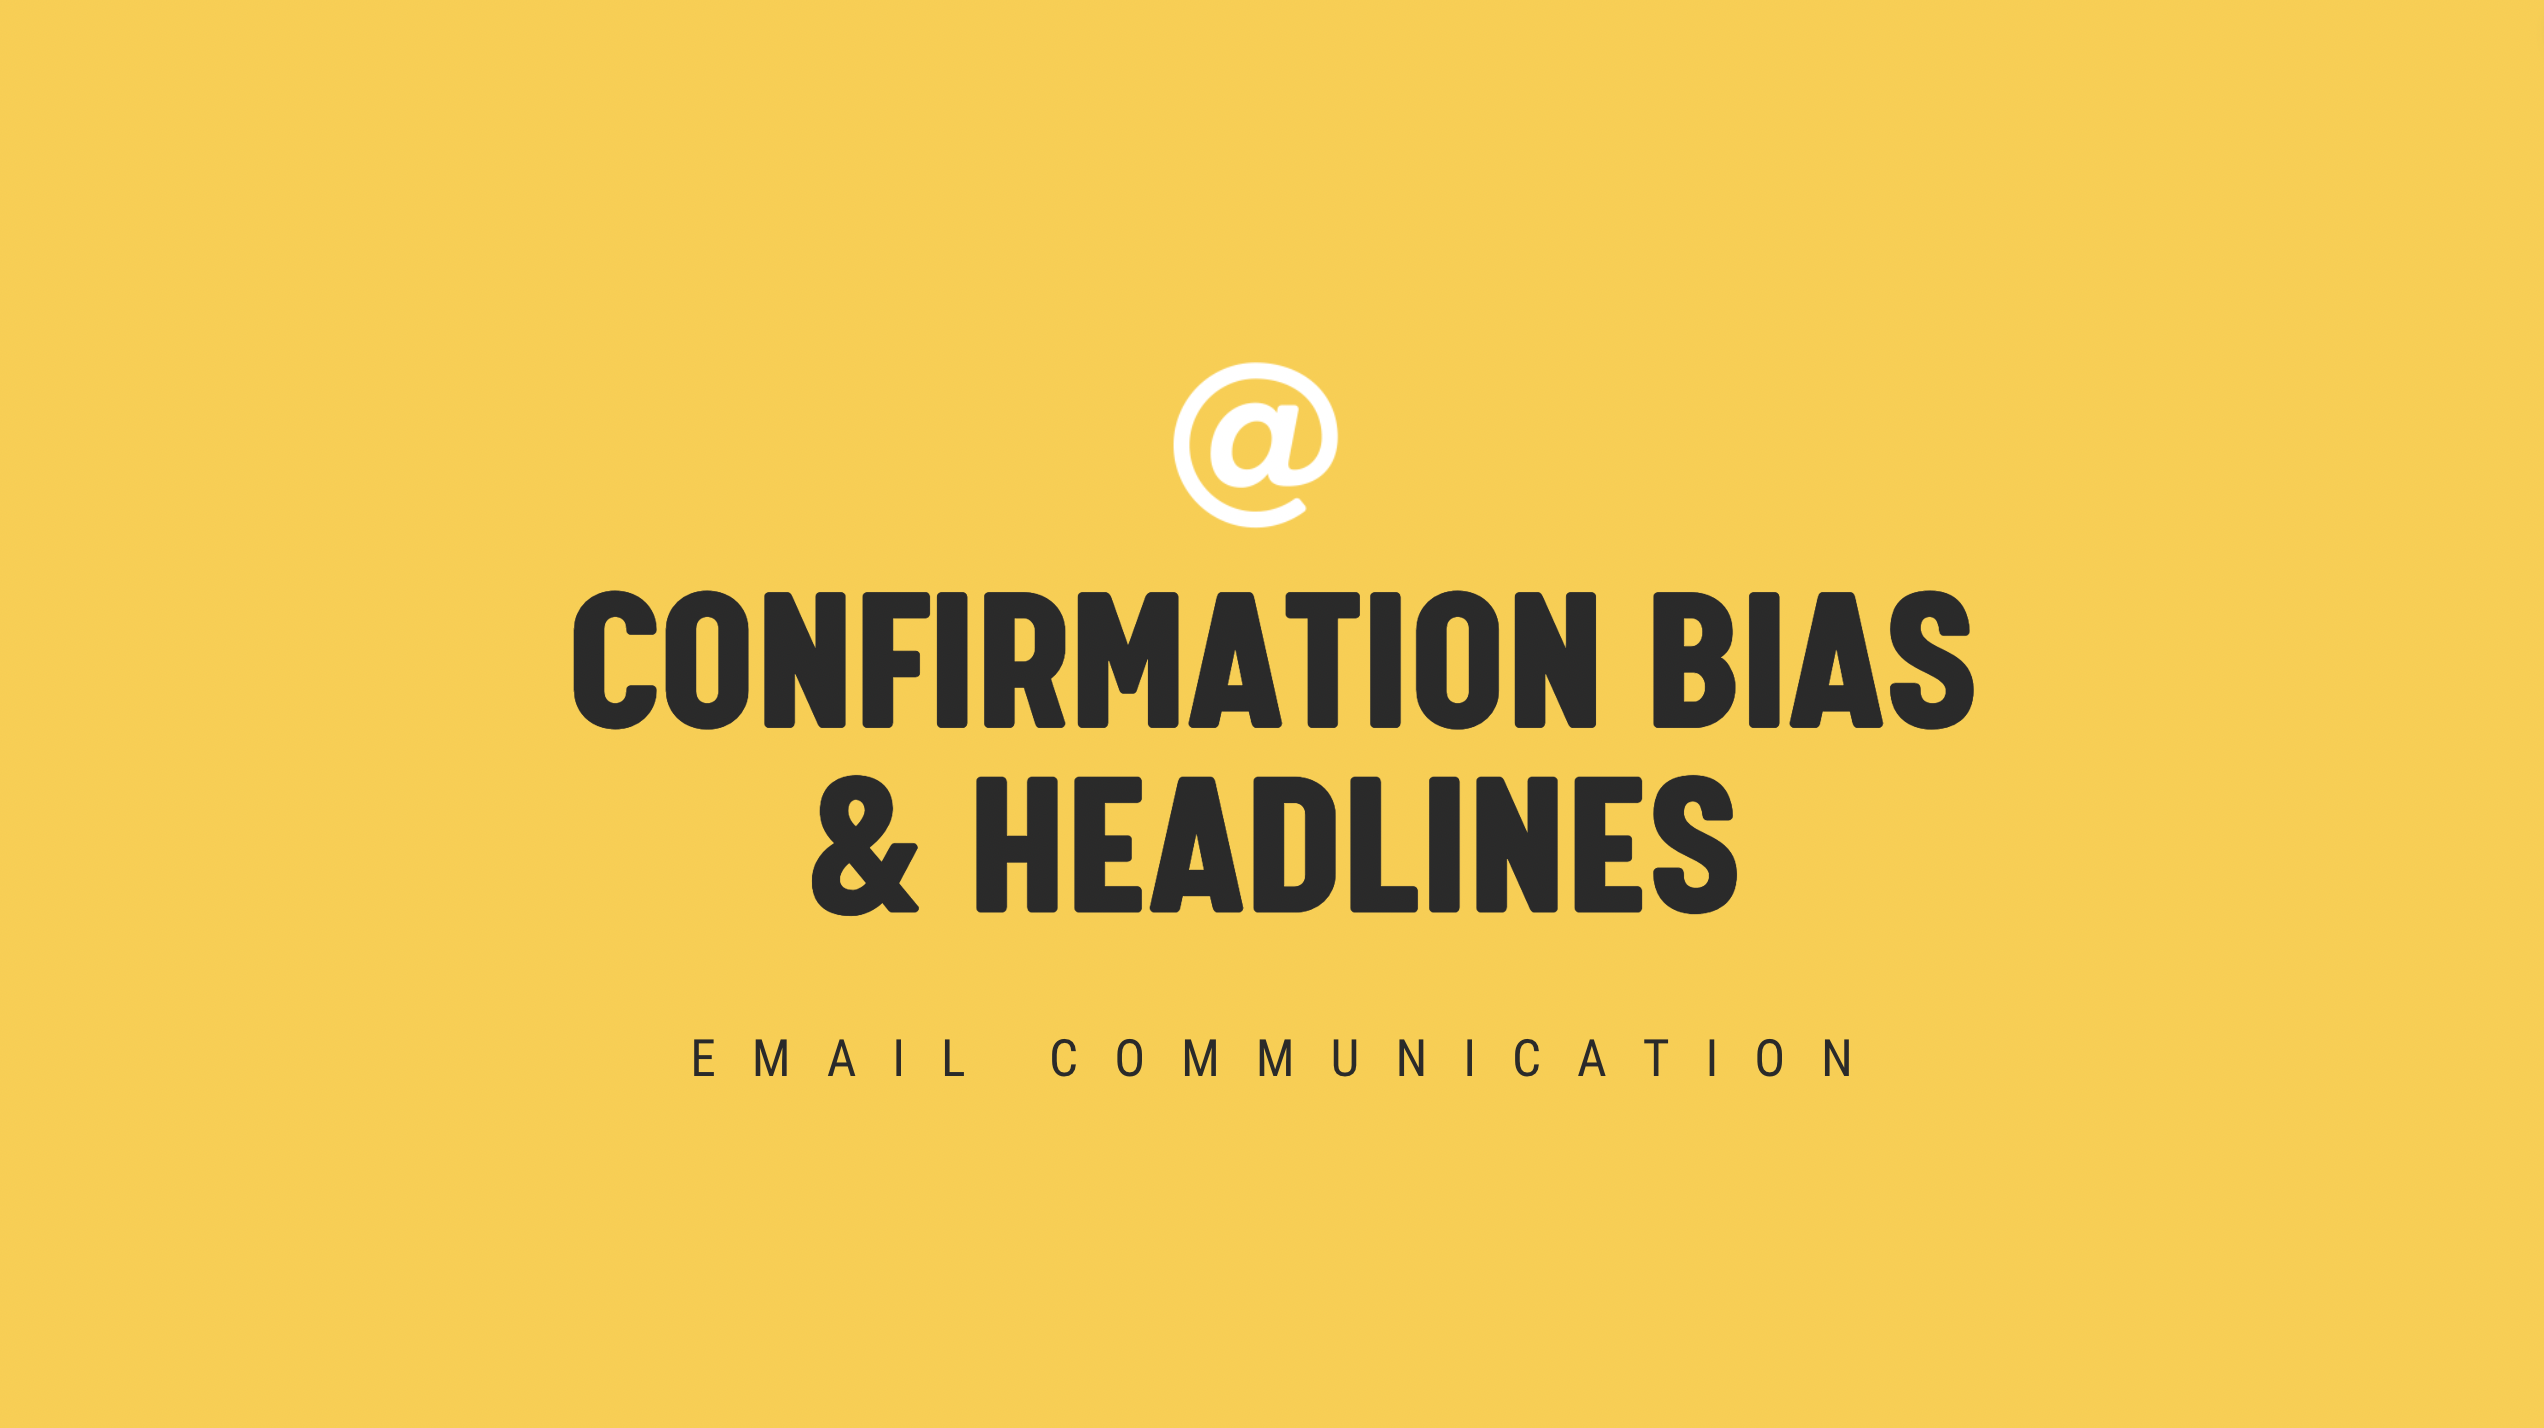 [NEW] Confirmation Bias & Headlines - Timely Email